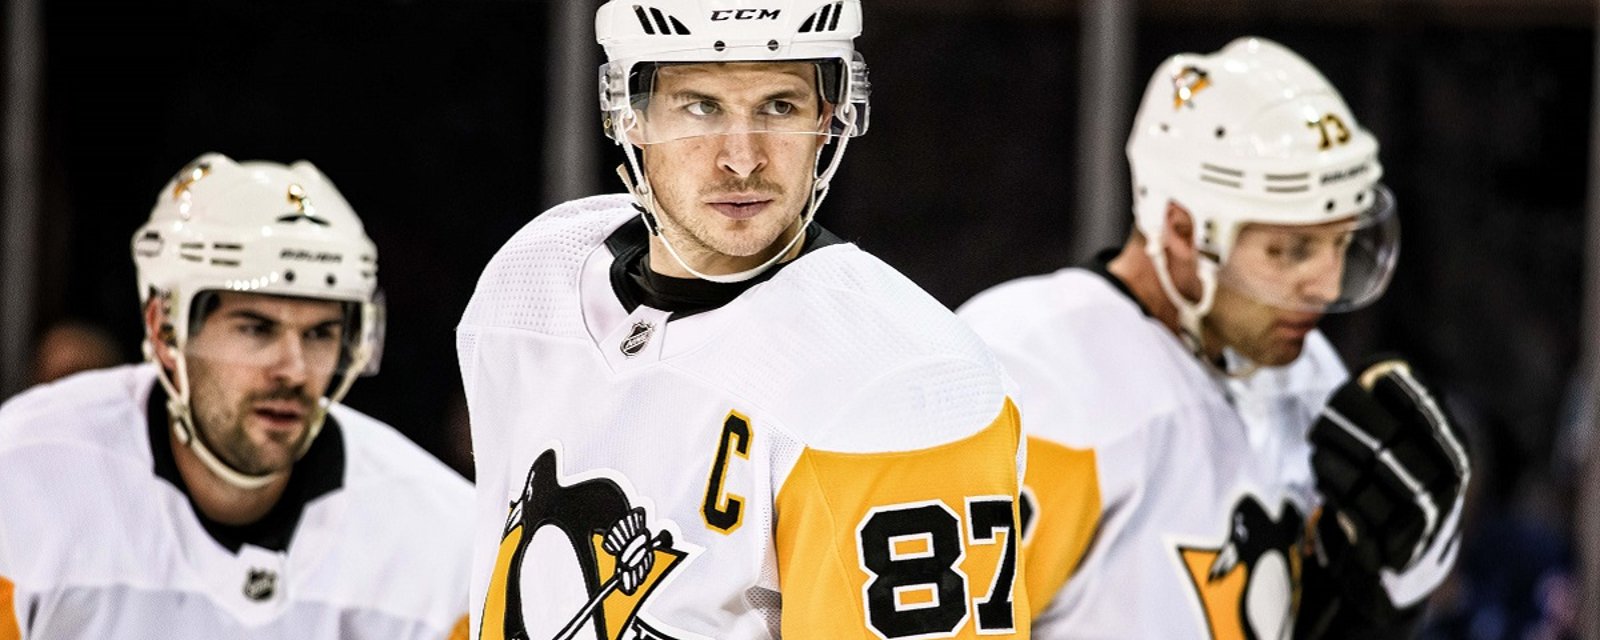 Sidney Crosby makes unbelievable donation to the local food bank.